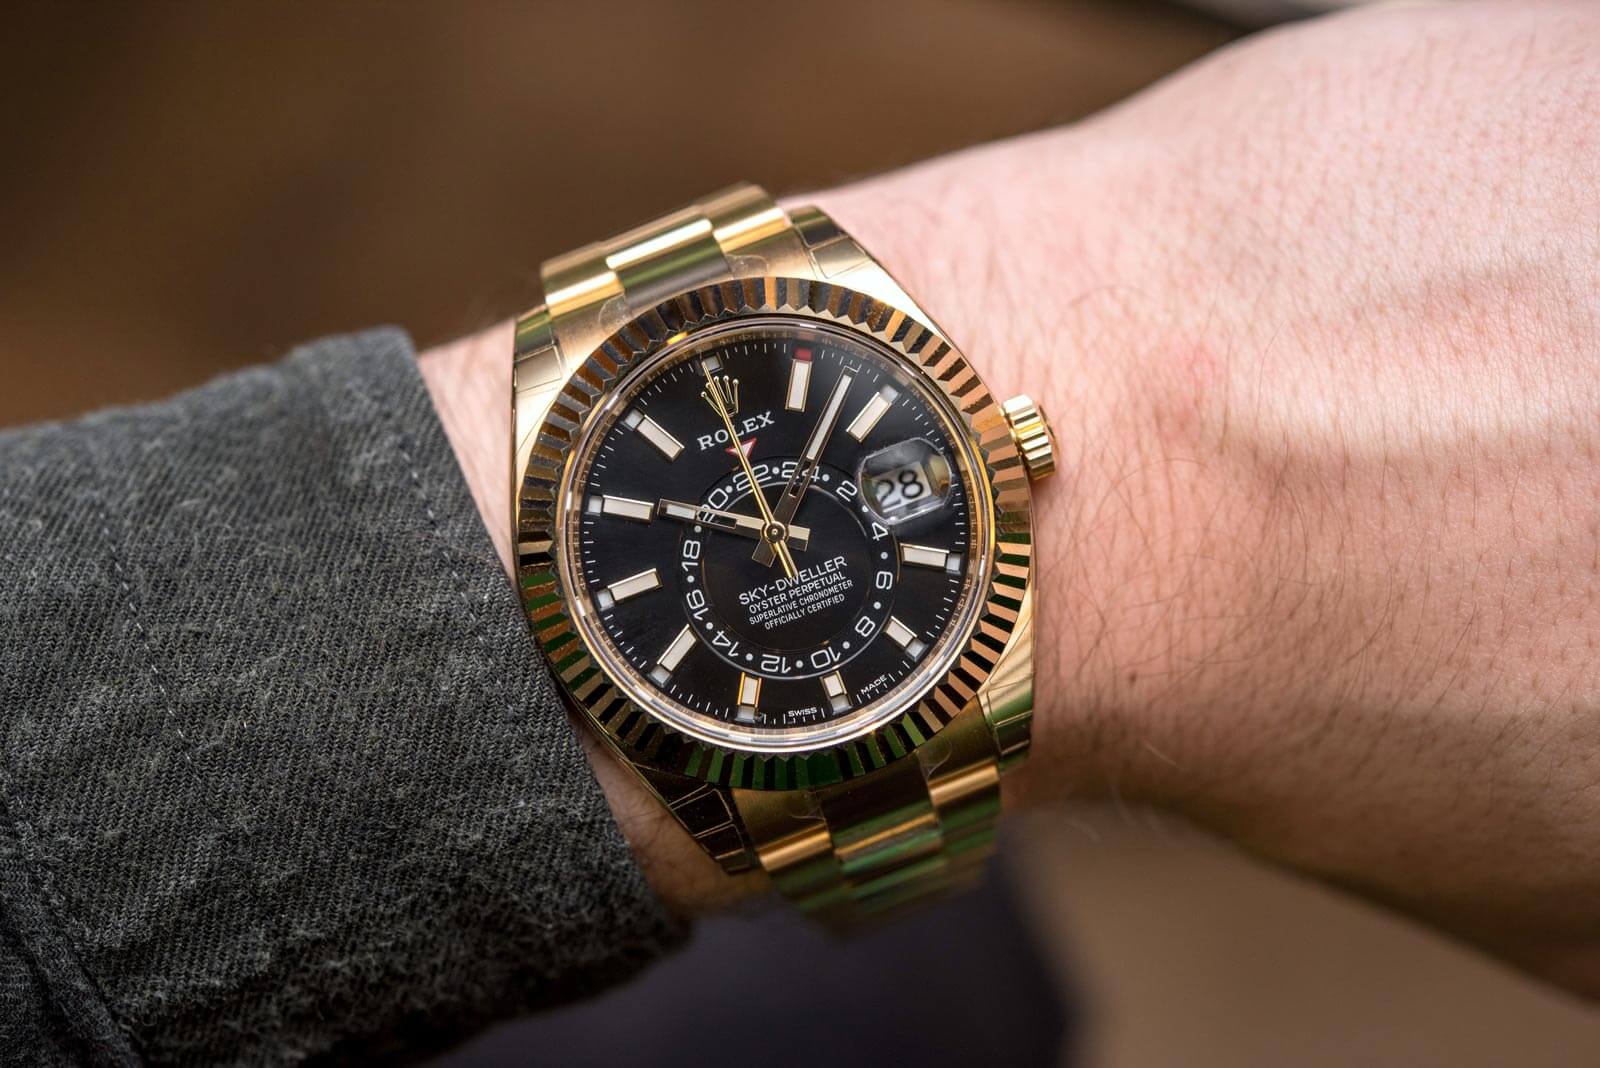 The best fake Rolex is with high performance and top quality.